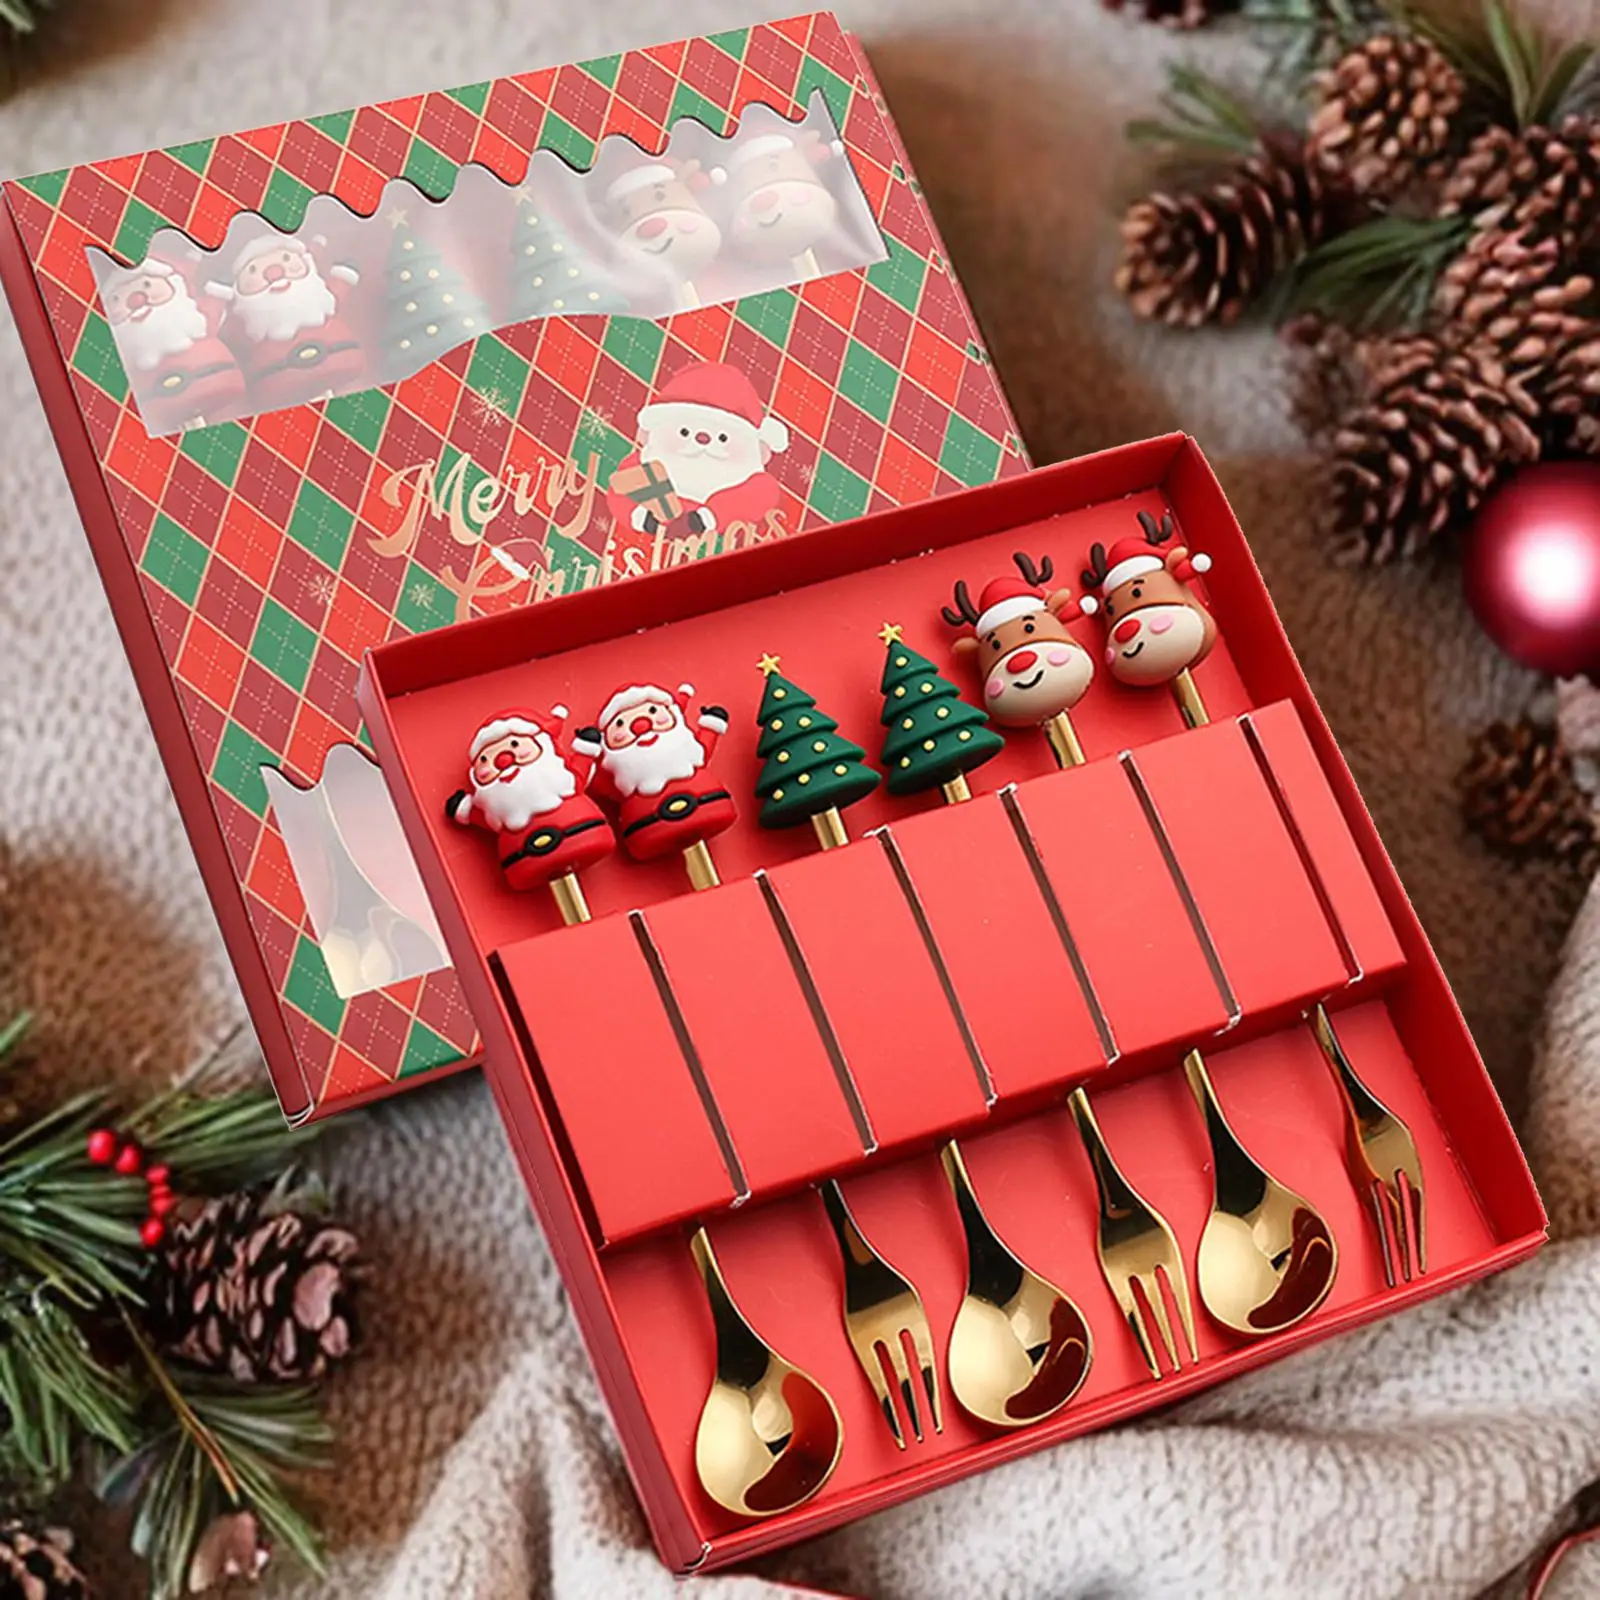 6 Pieces Christmas Spoons Forks Set Stainless Steel with Gift Box Flatware Cutlery Set for Daily Use Xmas Dessert